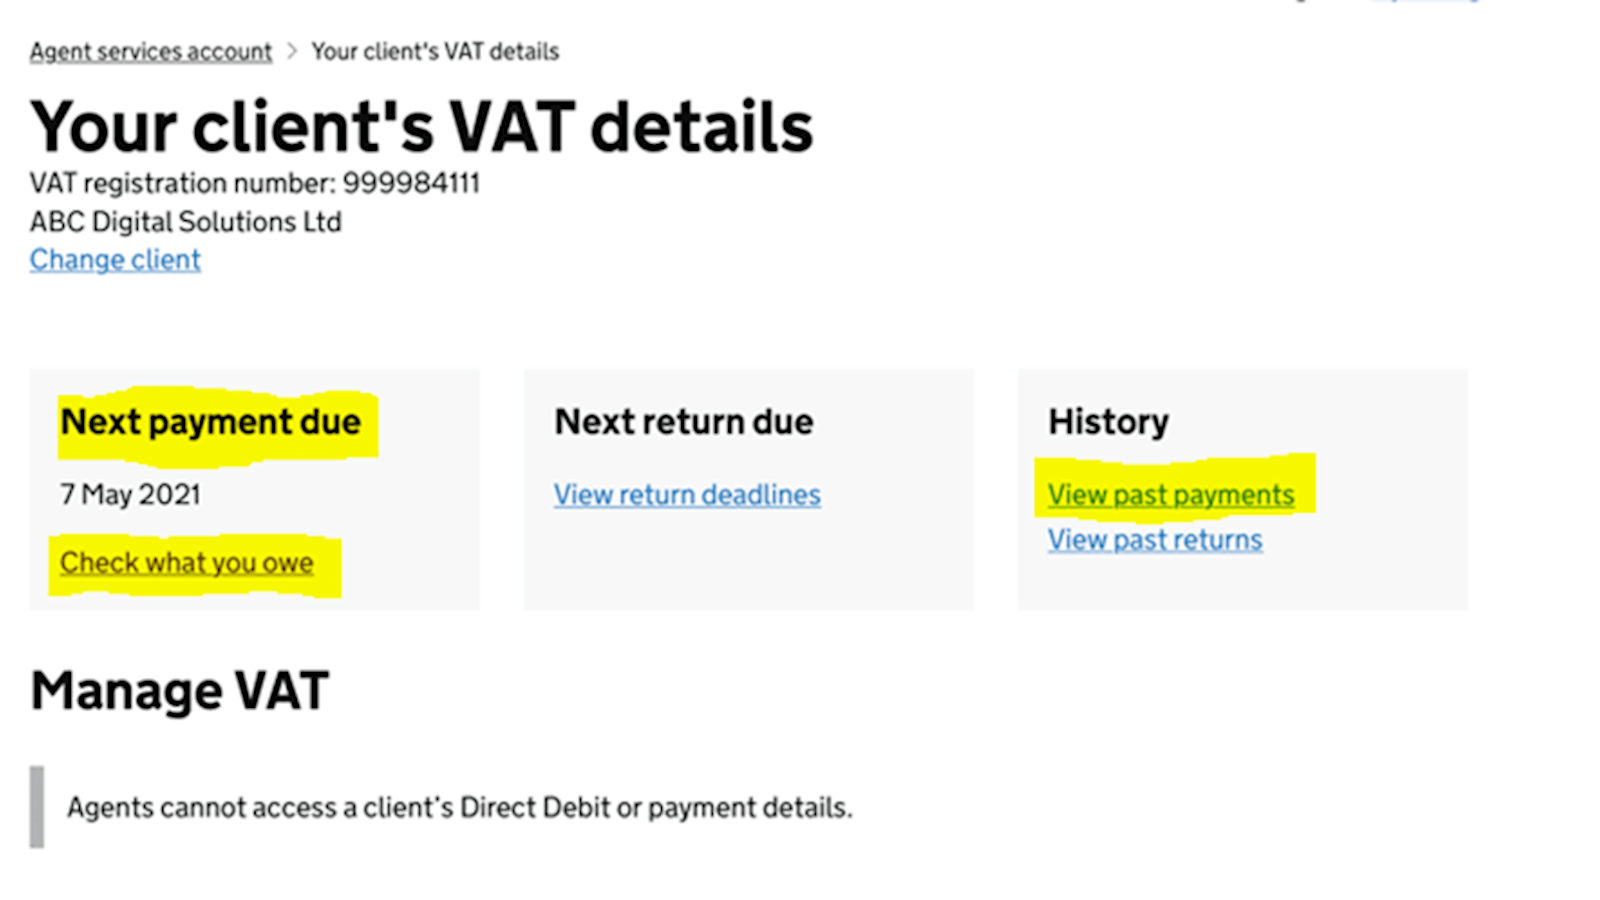 A screenshot demonstrating the new VAT data available to agents through the expanded agent service account.